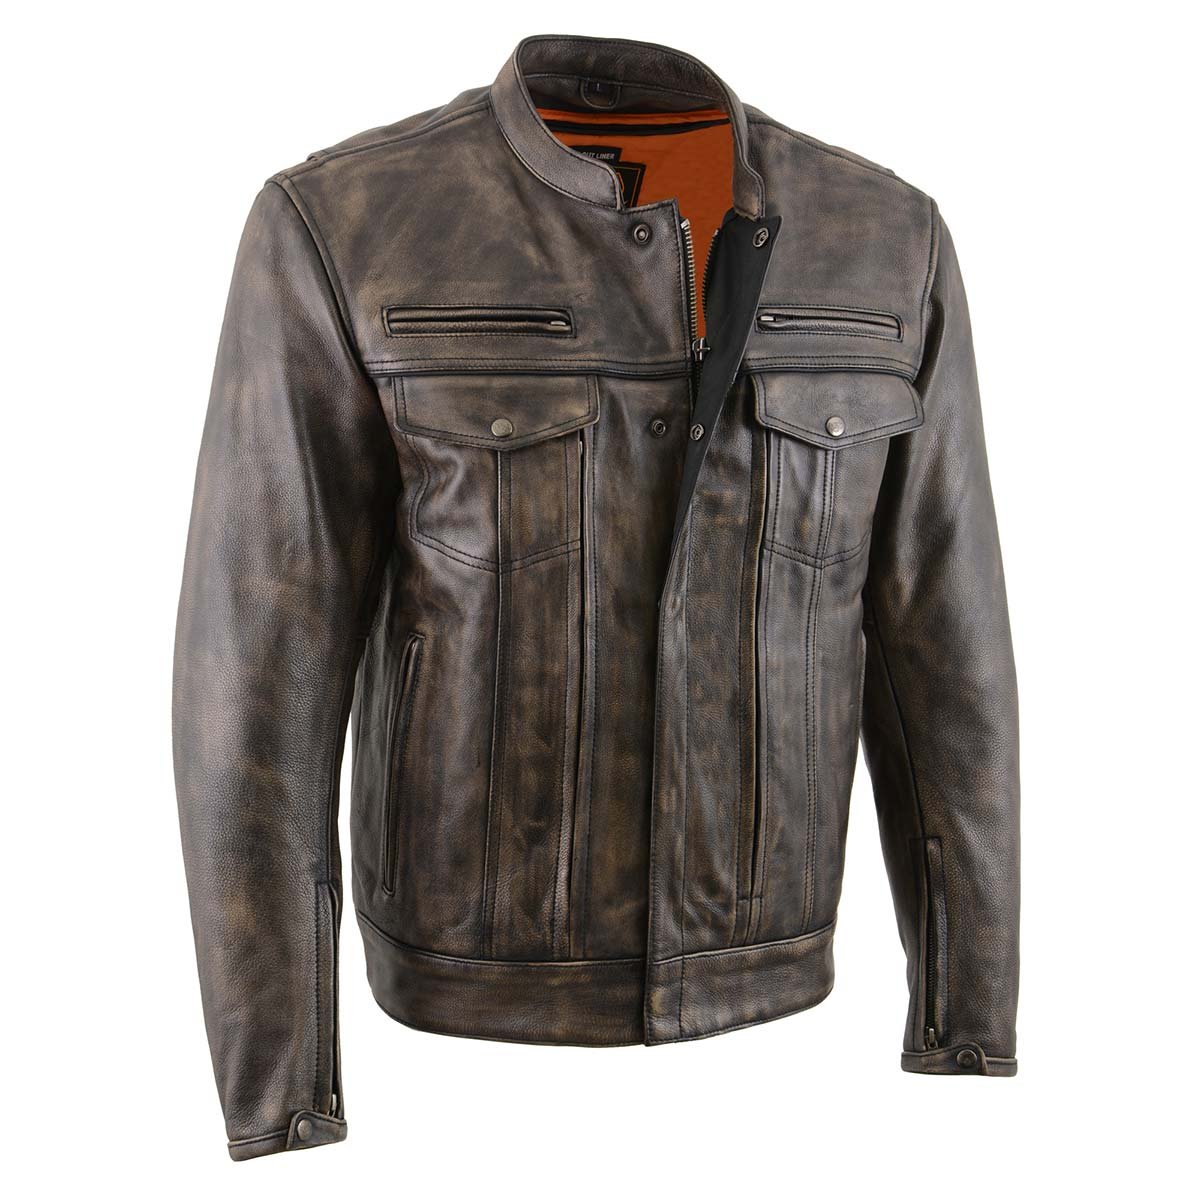 Image of Milwaukee Leather MLM1508 Men's Distress Brown Leather Jacket with Utility Pockets